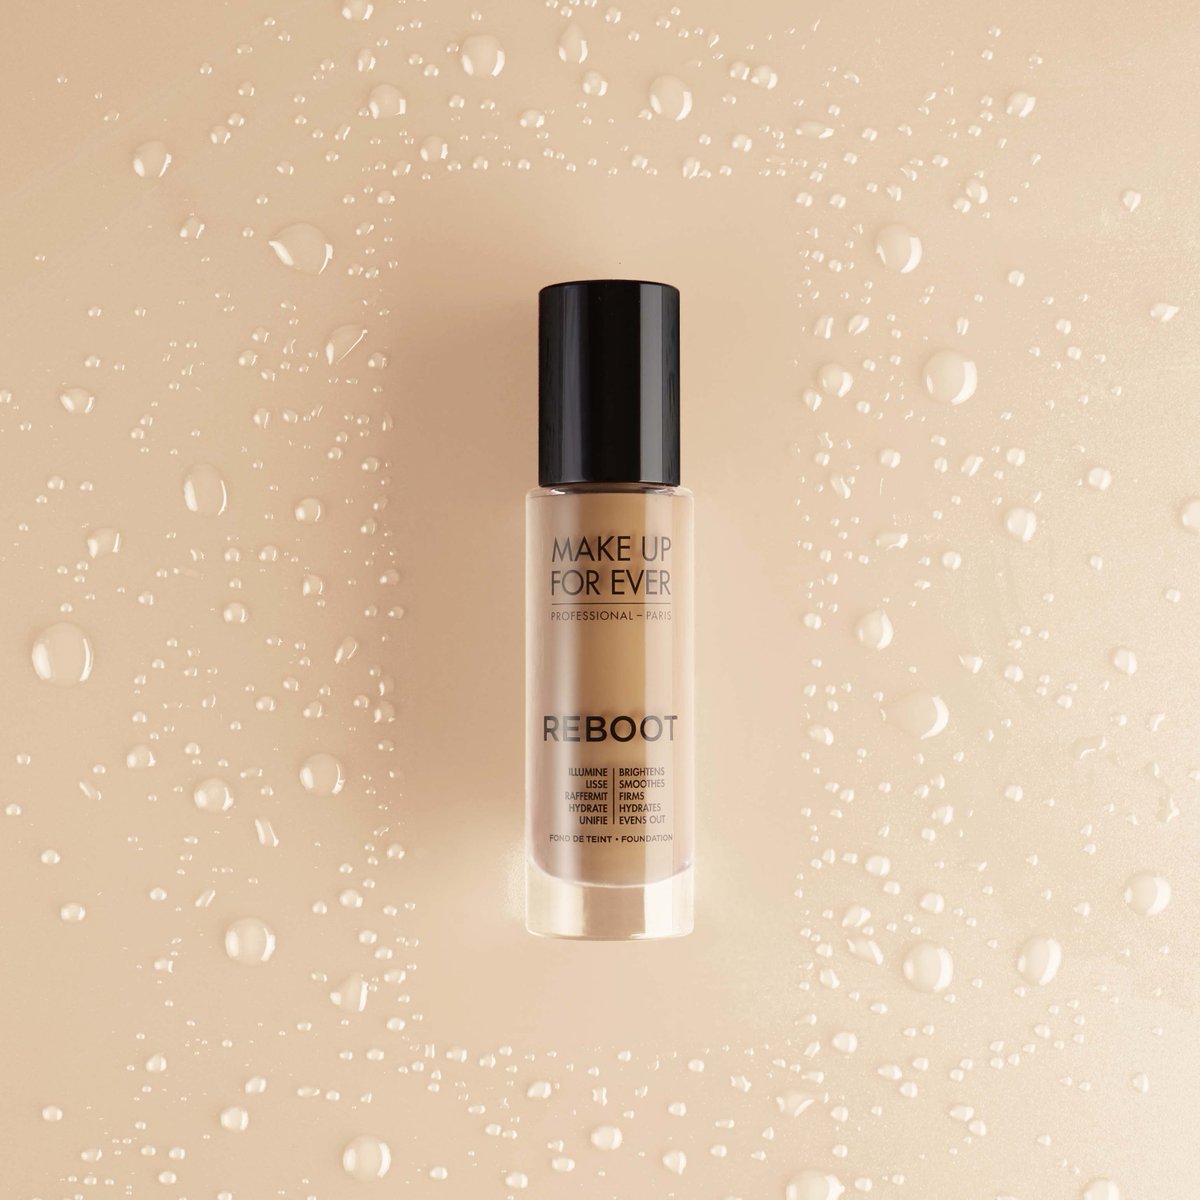 MAKE UP FOR EVER Reboot Foundation Illuminating Makeup Ambient